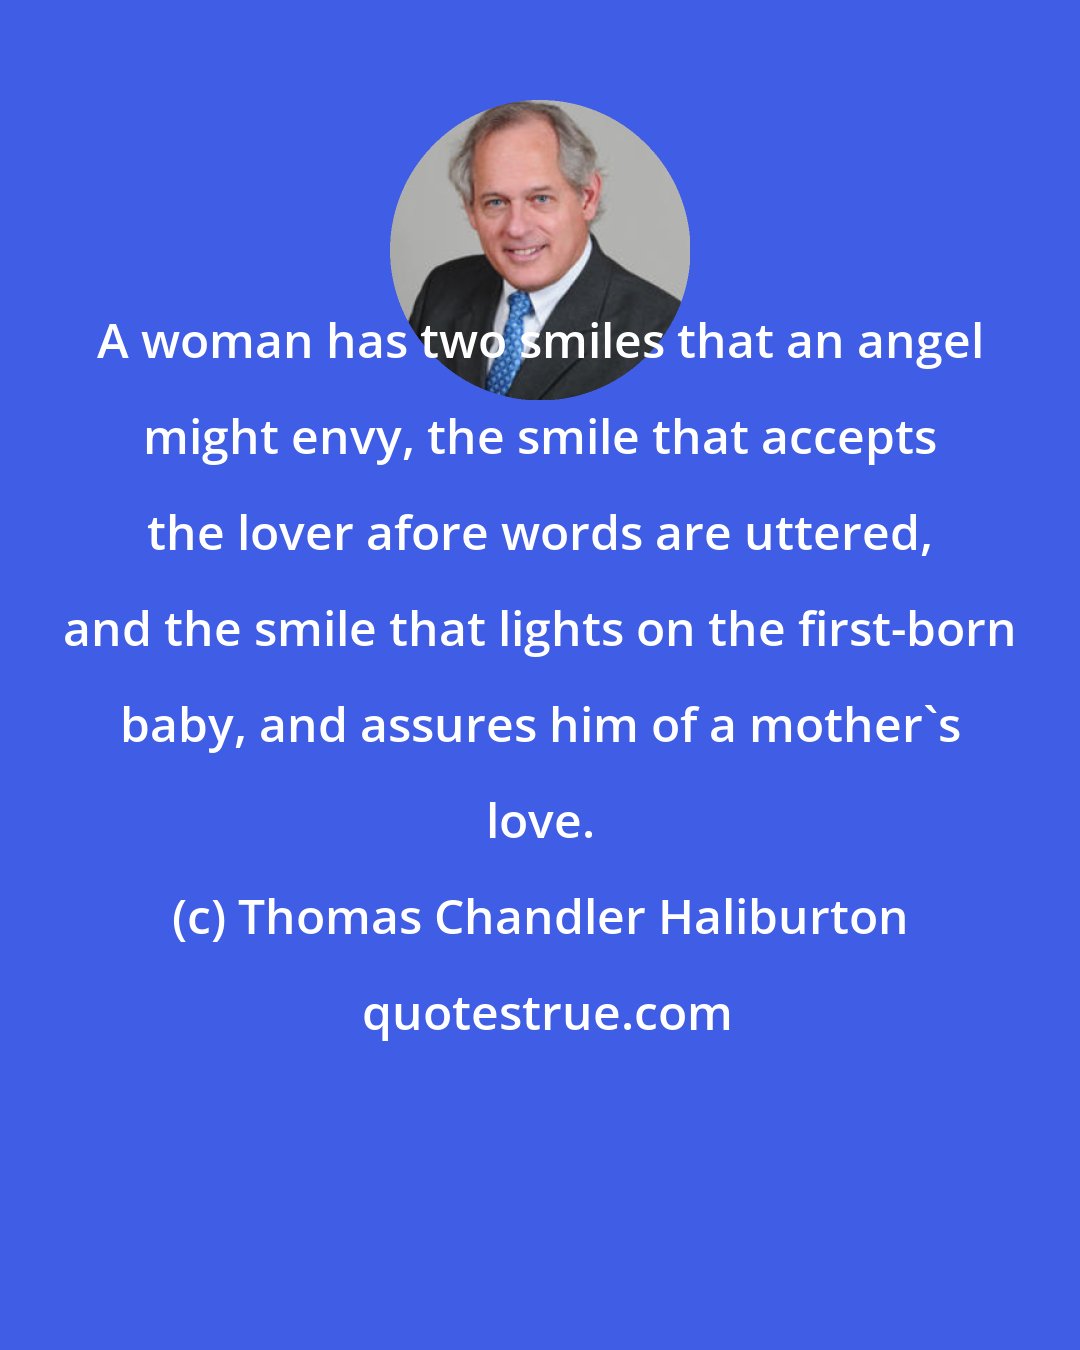 Thomas Chandler Haliburton: A woman has two smiles that an angel might envy, the smile that accepts the lover afore words are uttered, and the smile that lights on the first-born baby, and assures him of a mother's love.